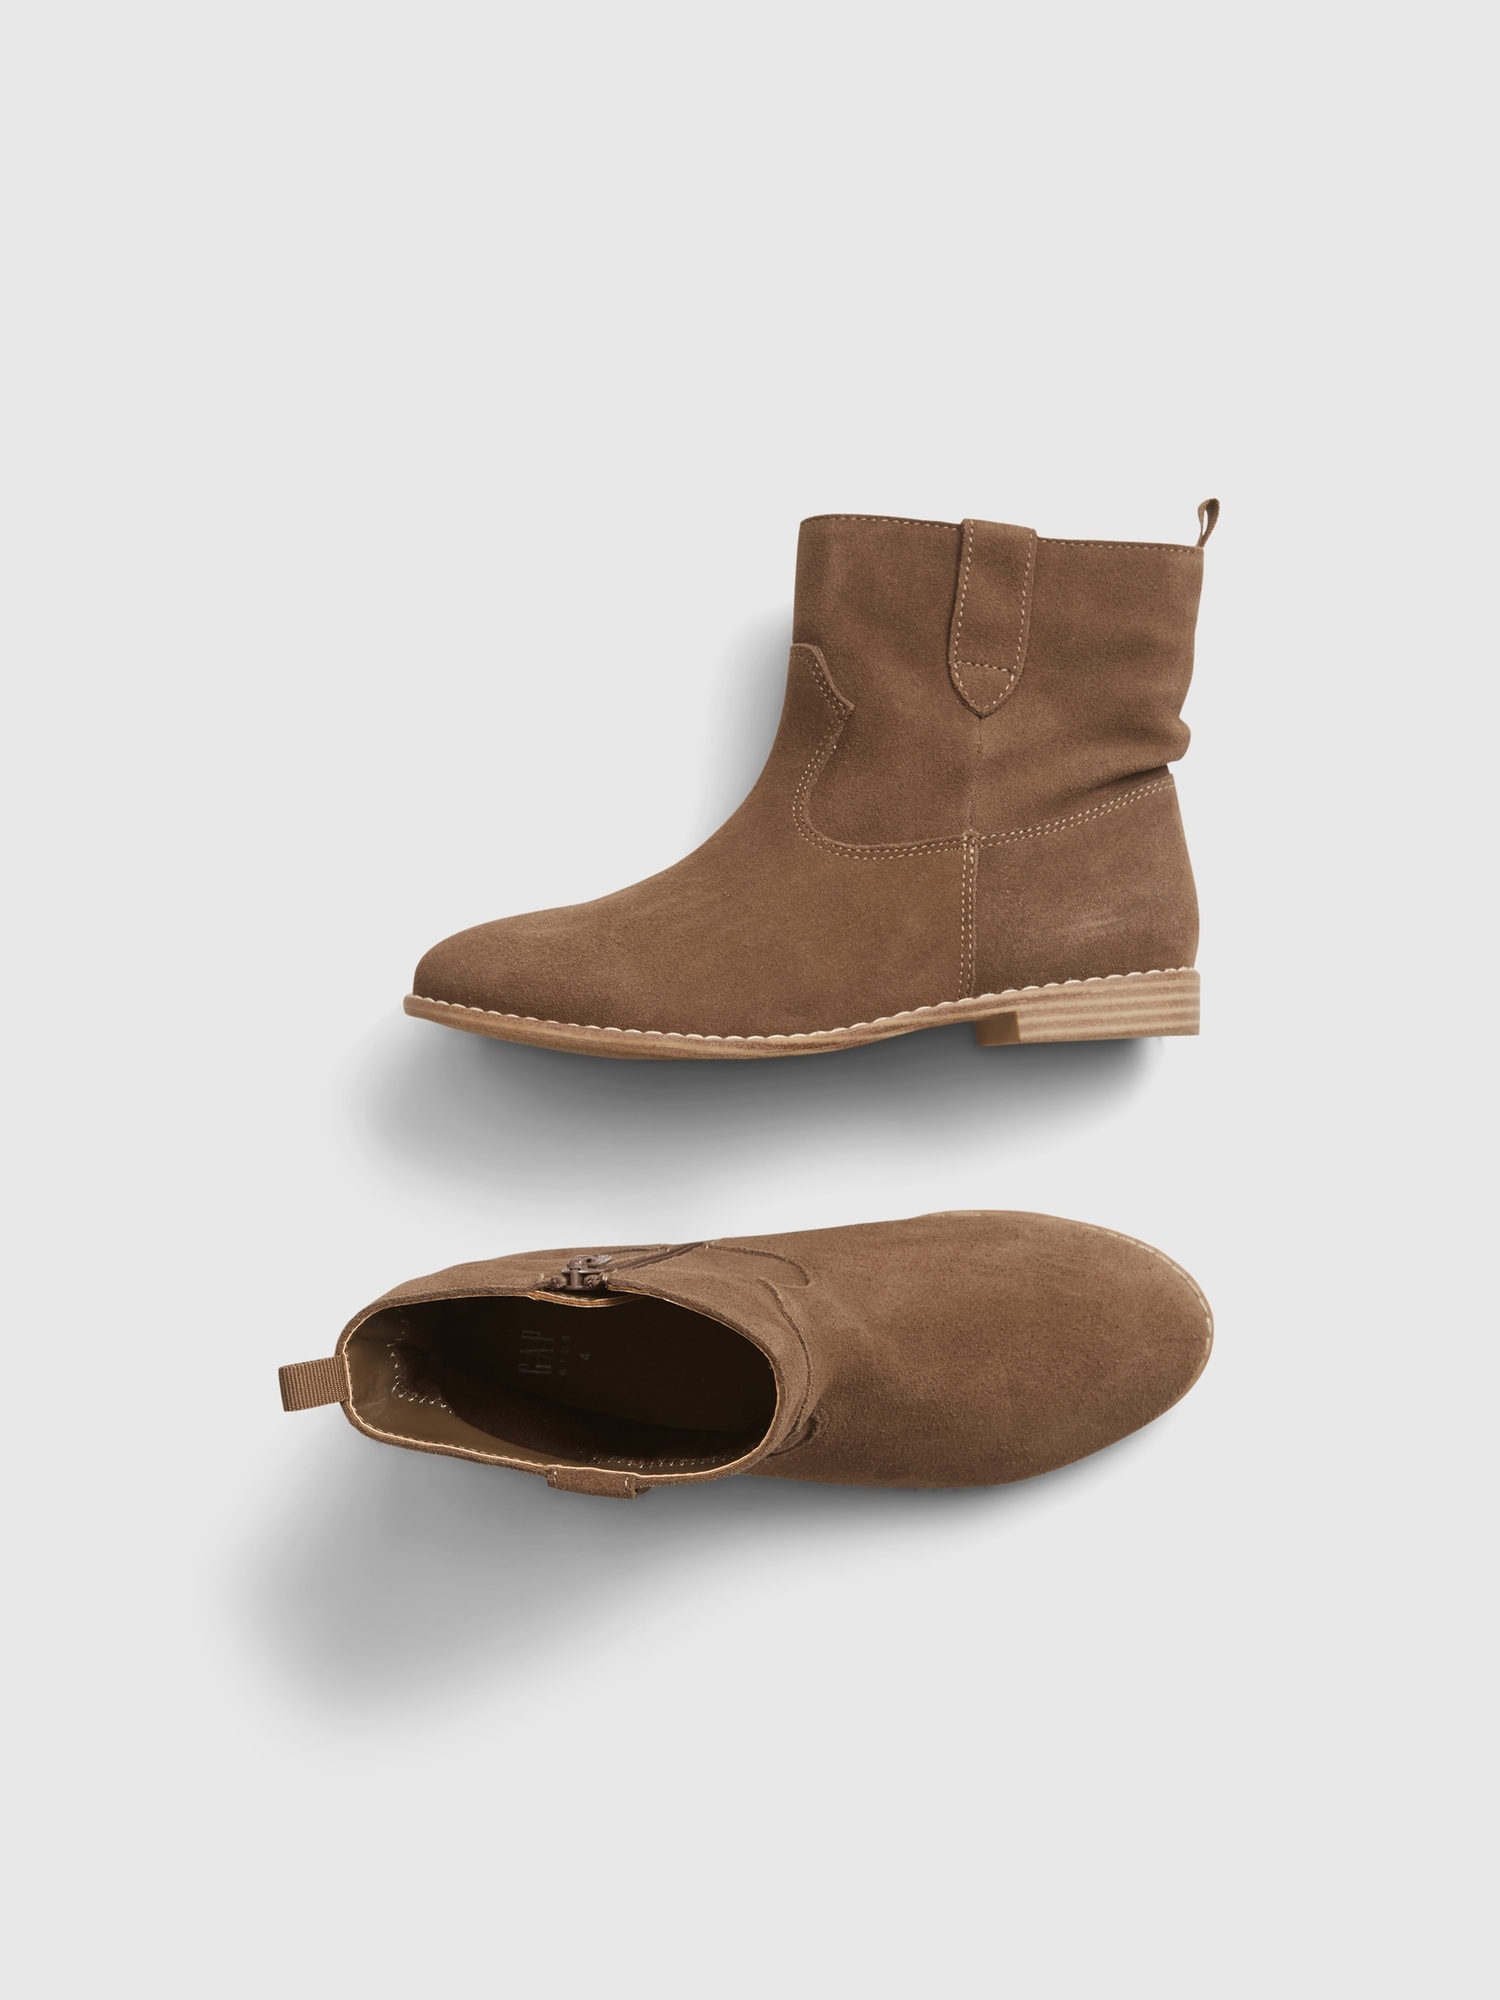 Kids Slouchy Ankle Boots | Gap